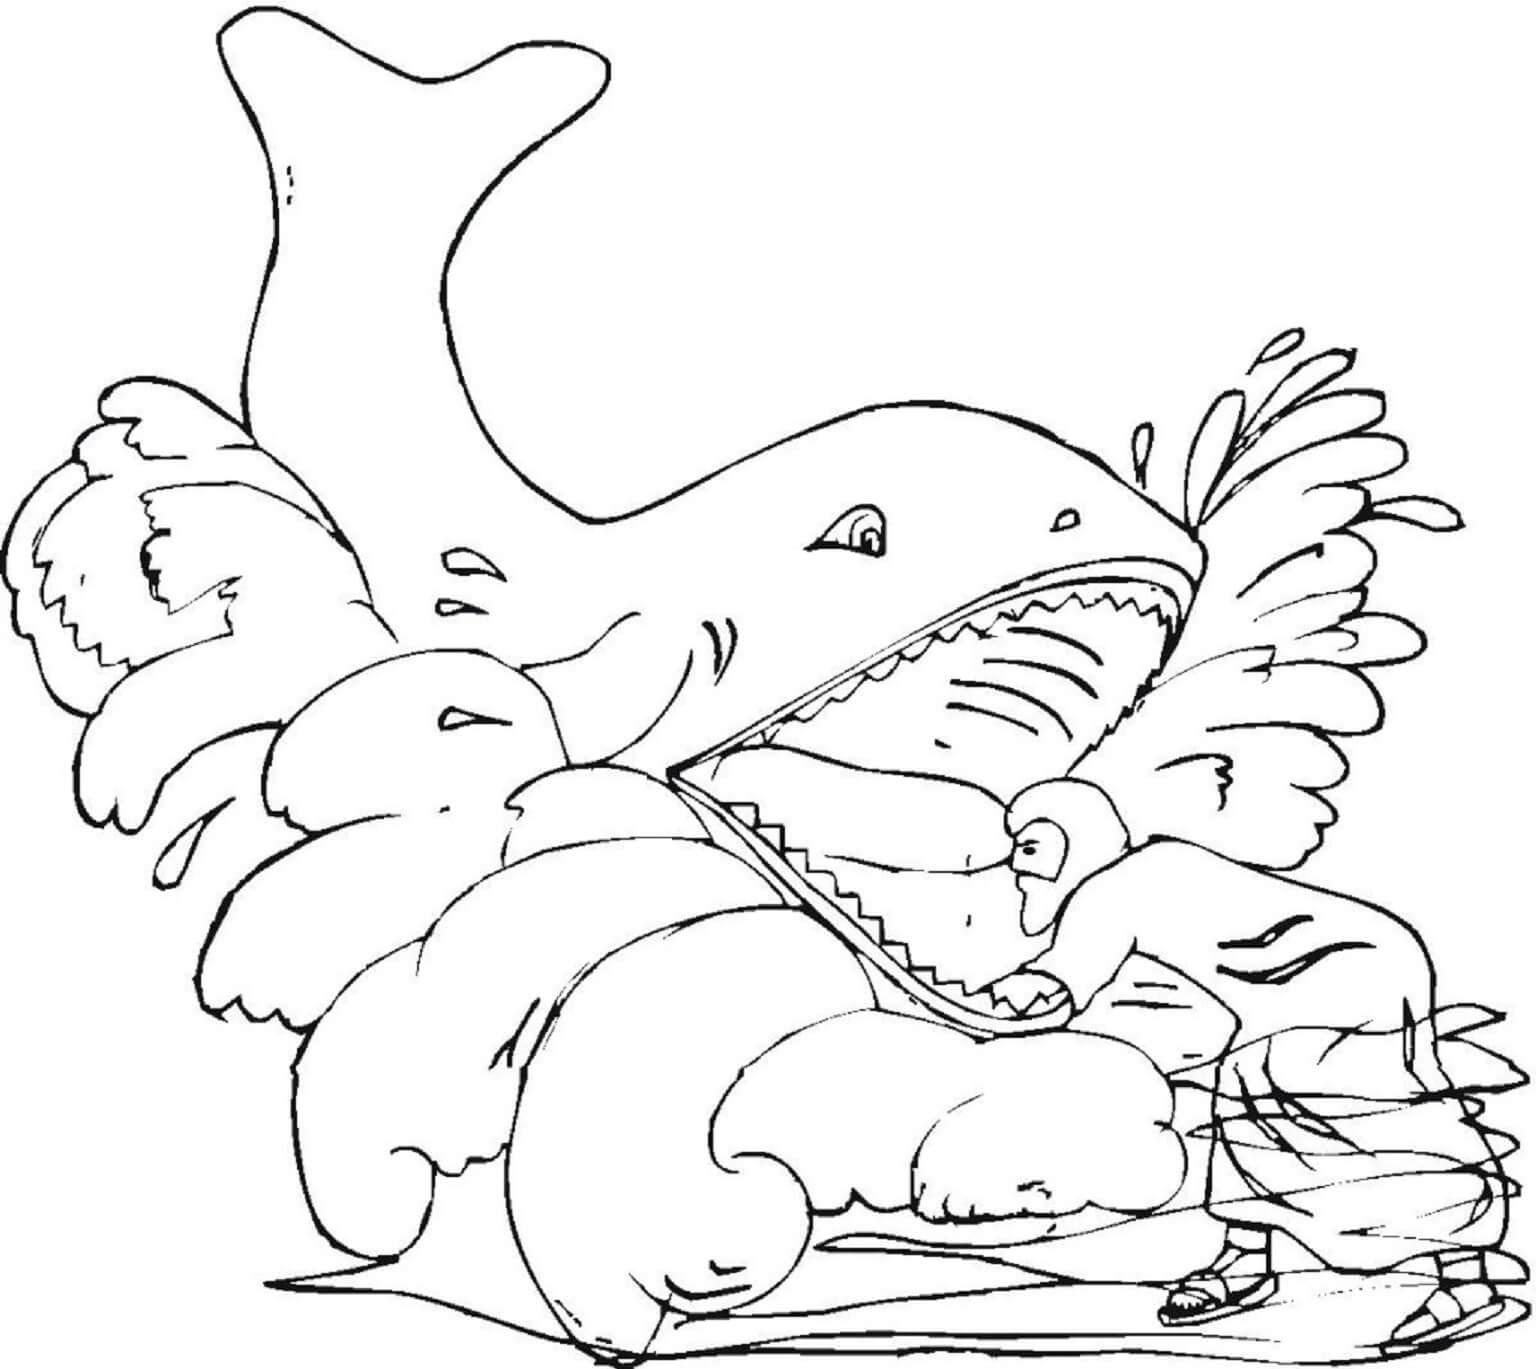 Jonah and The Whale coloring page Download Print or Color Online for